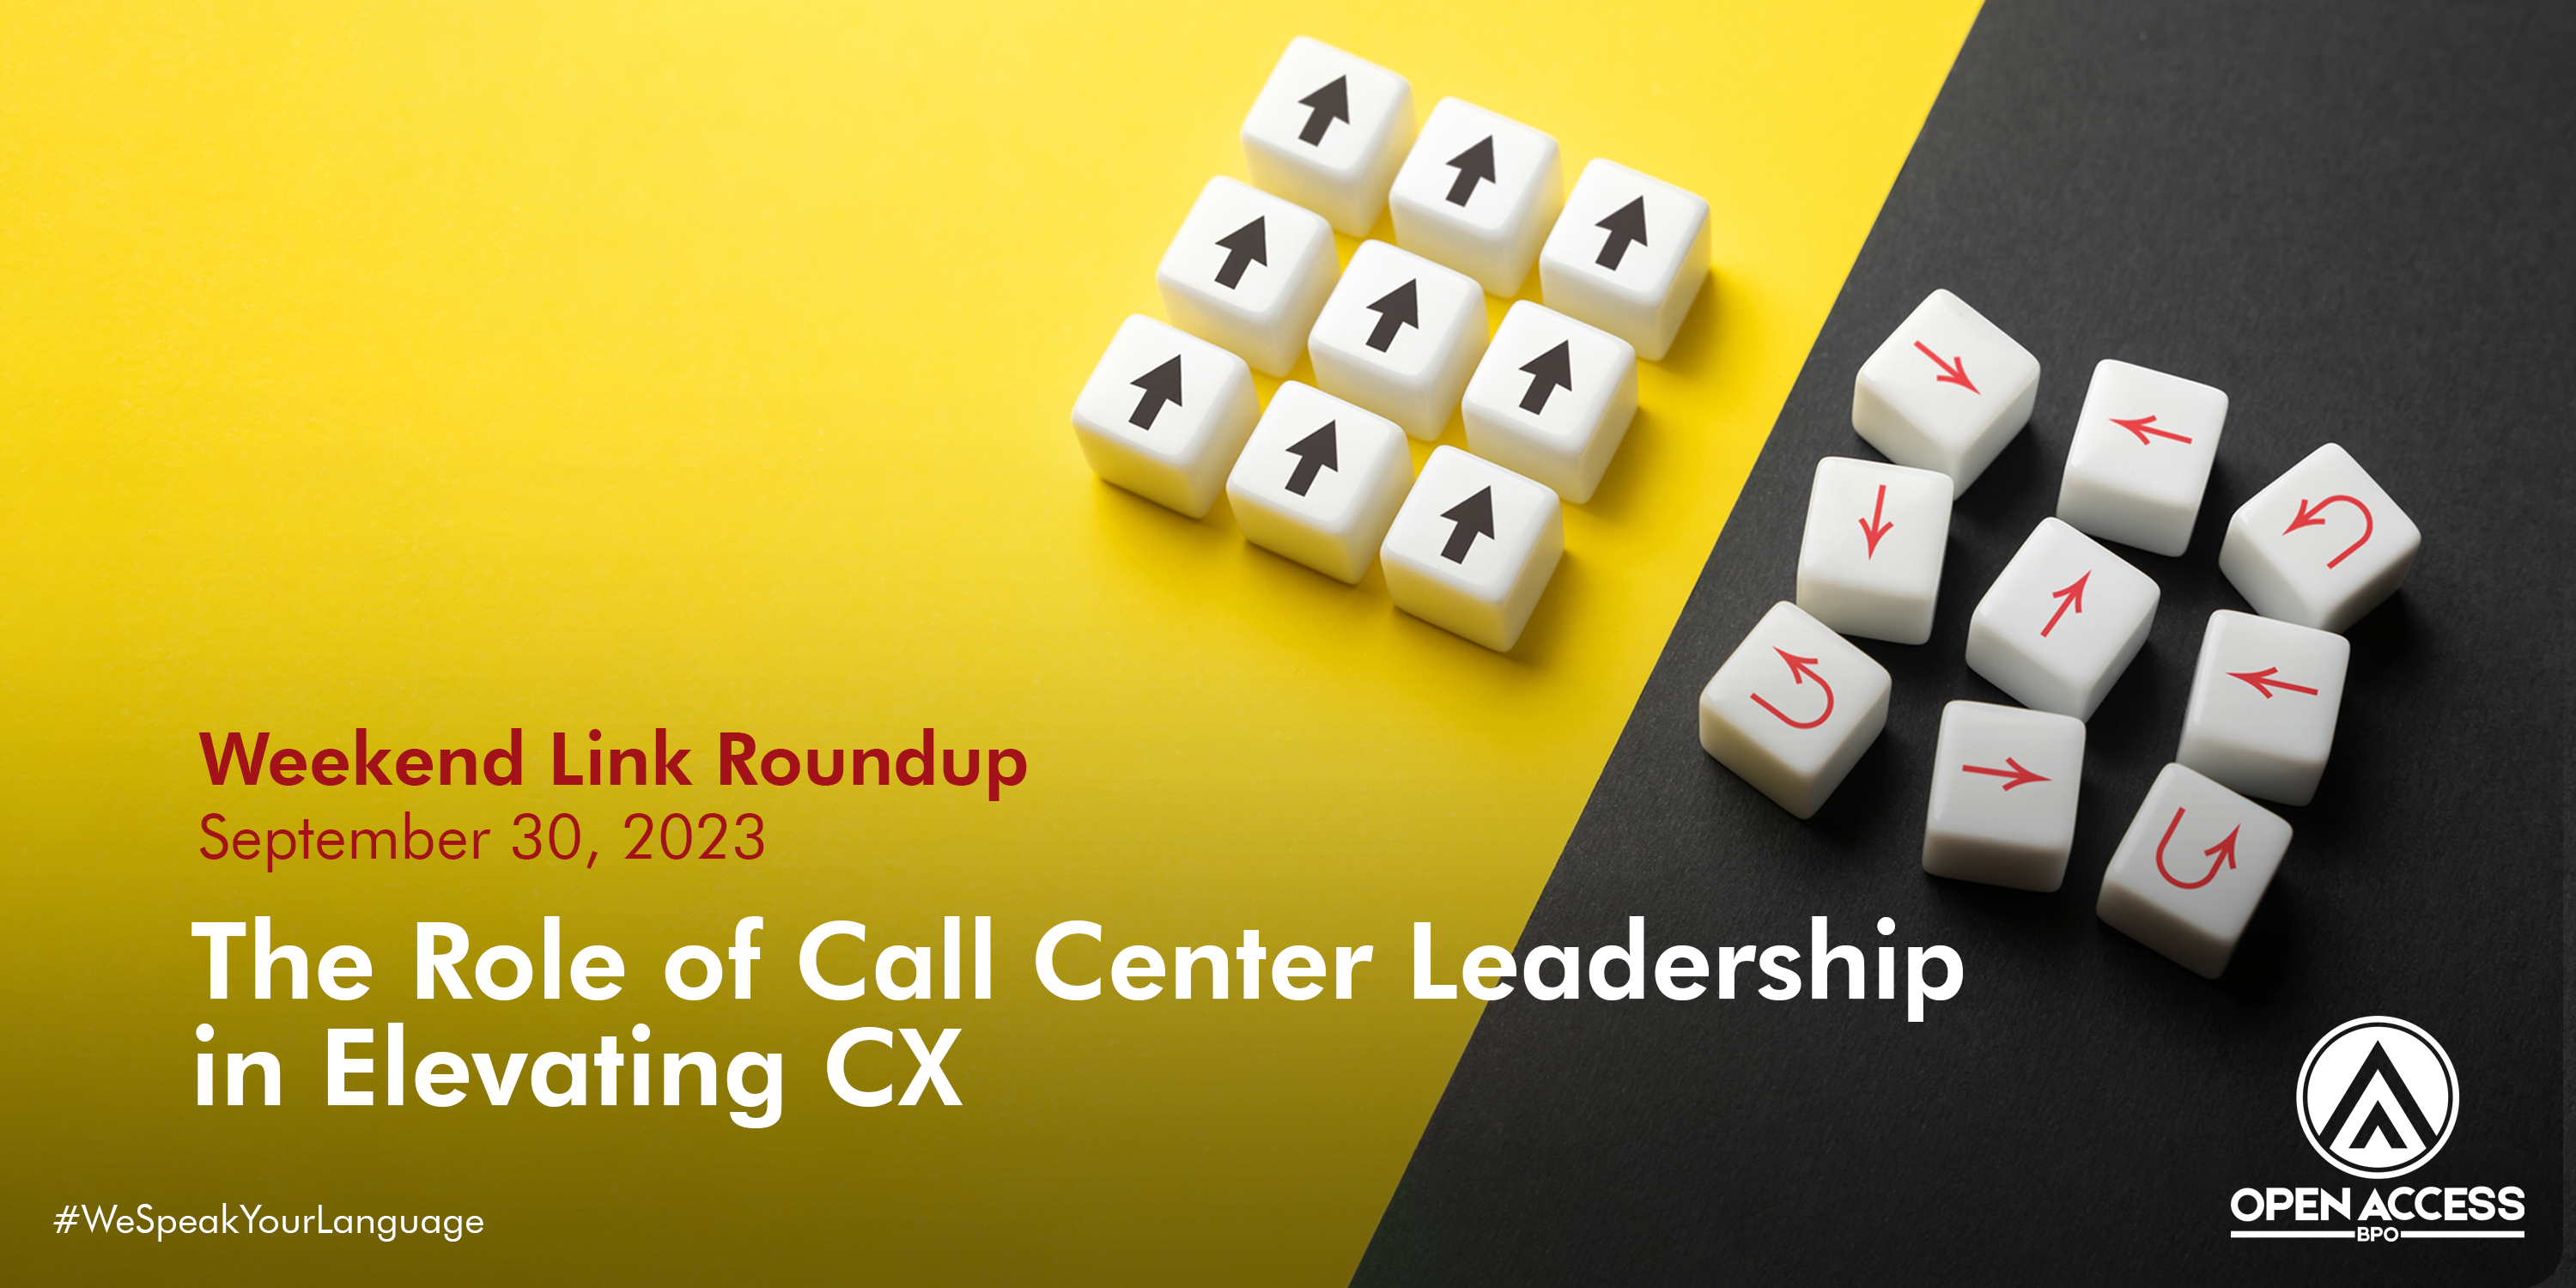 The Role of Call Center Leadership in elevating CX